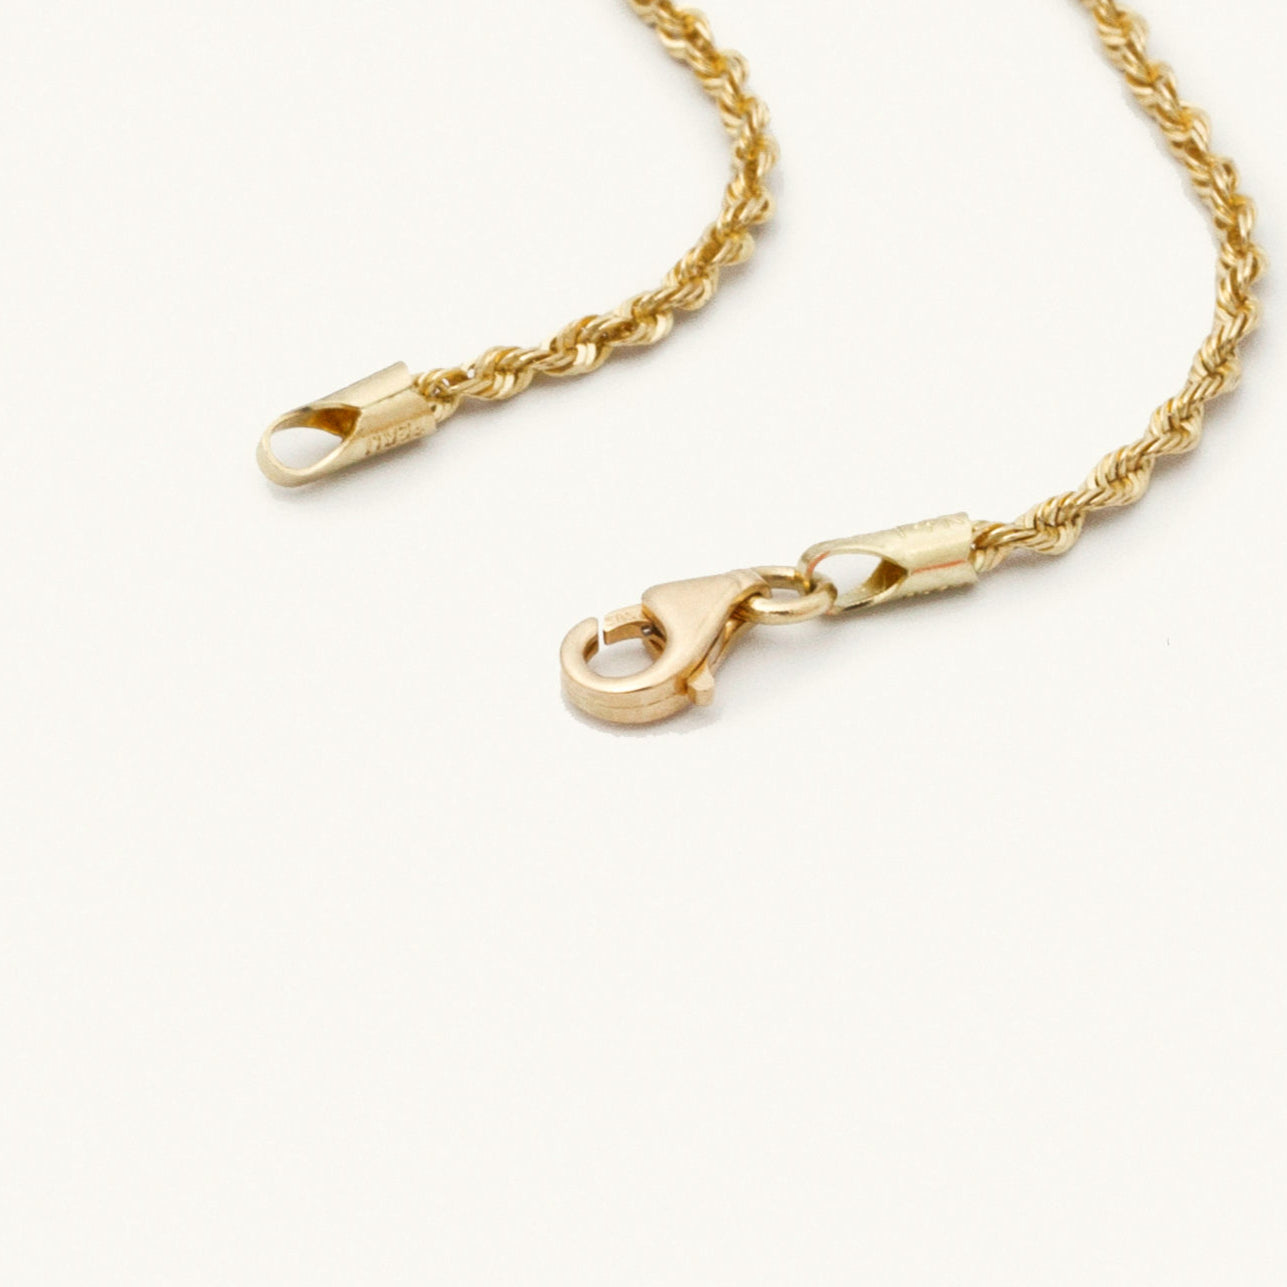 14K SOLID GOLD ROPE NECKLACE